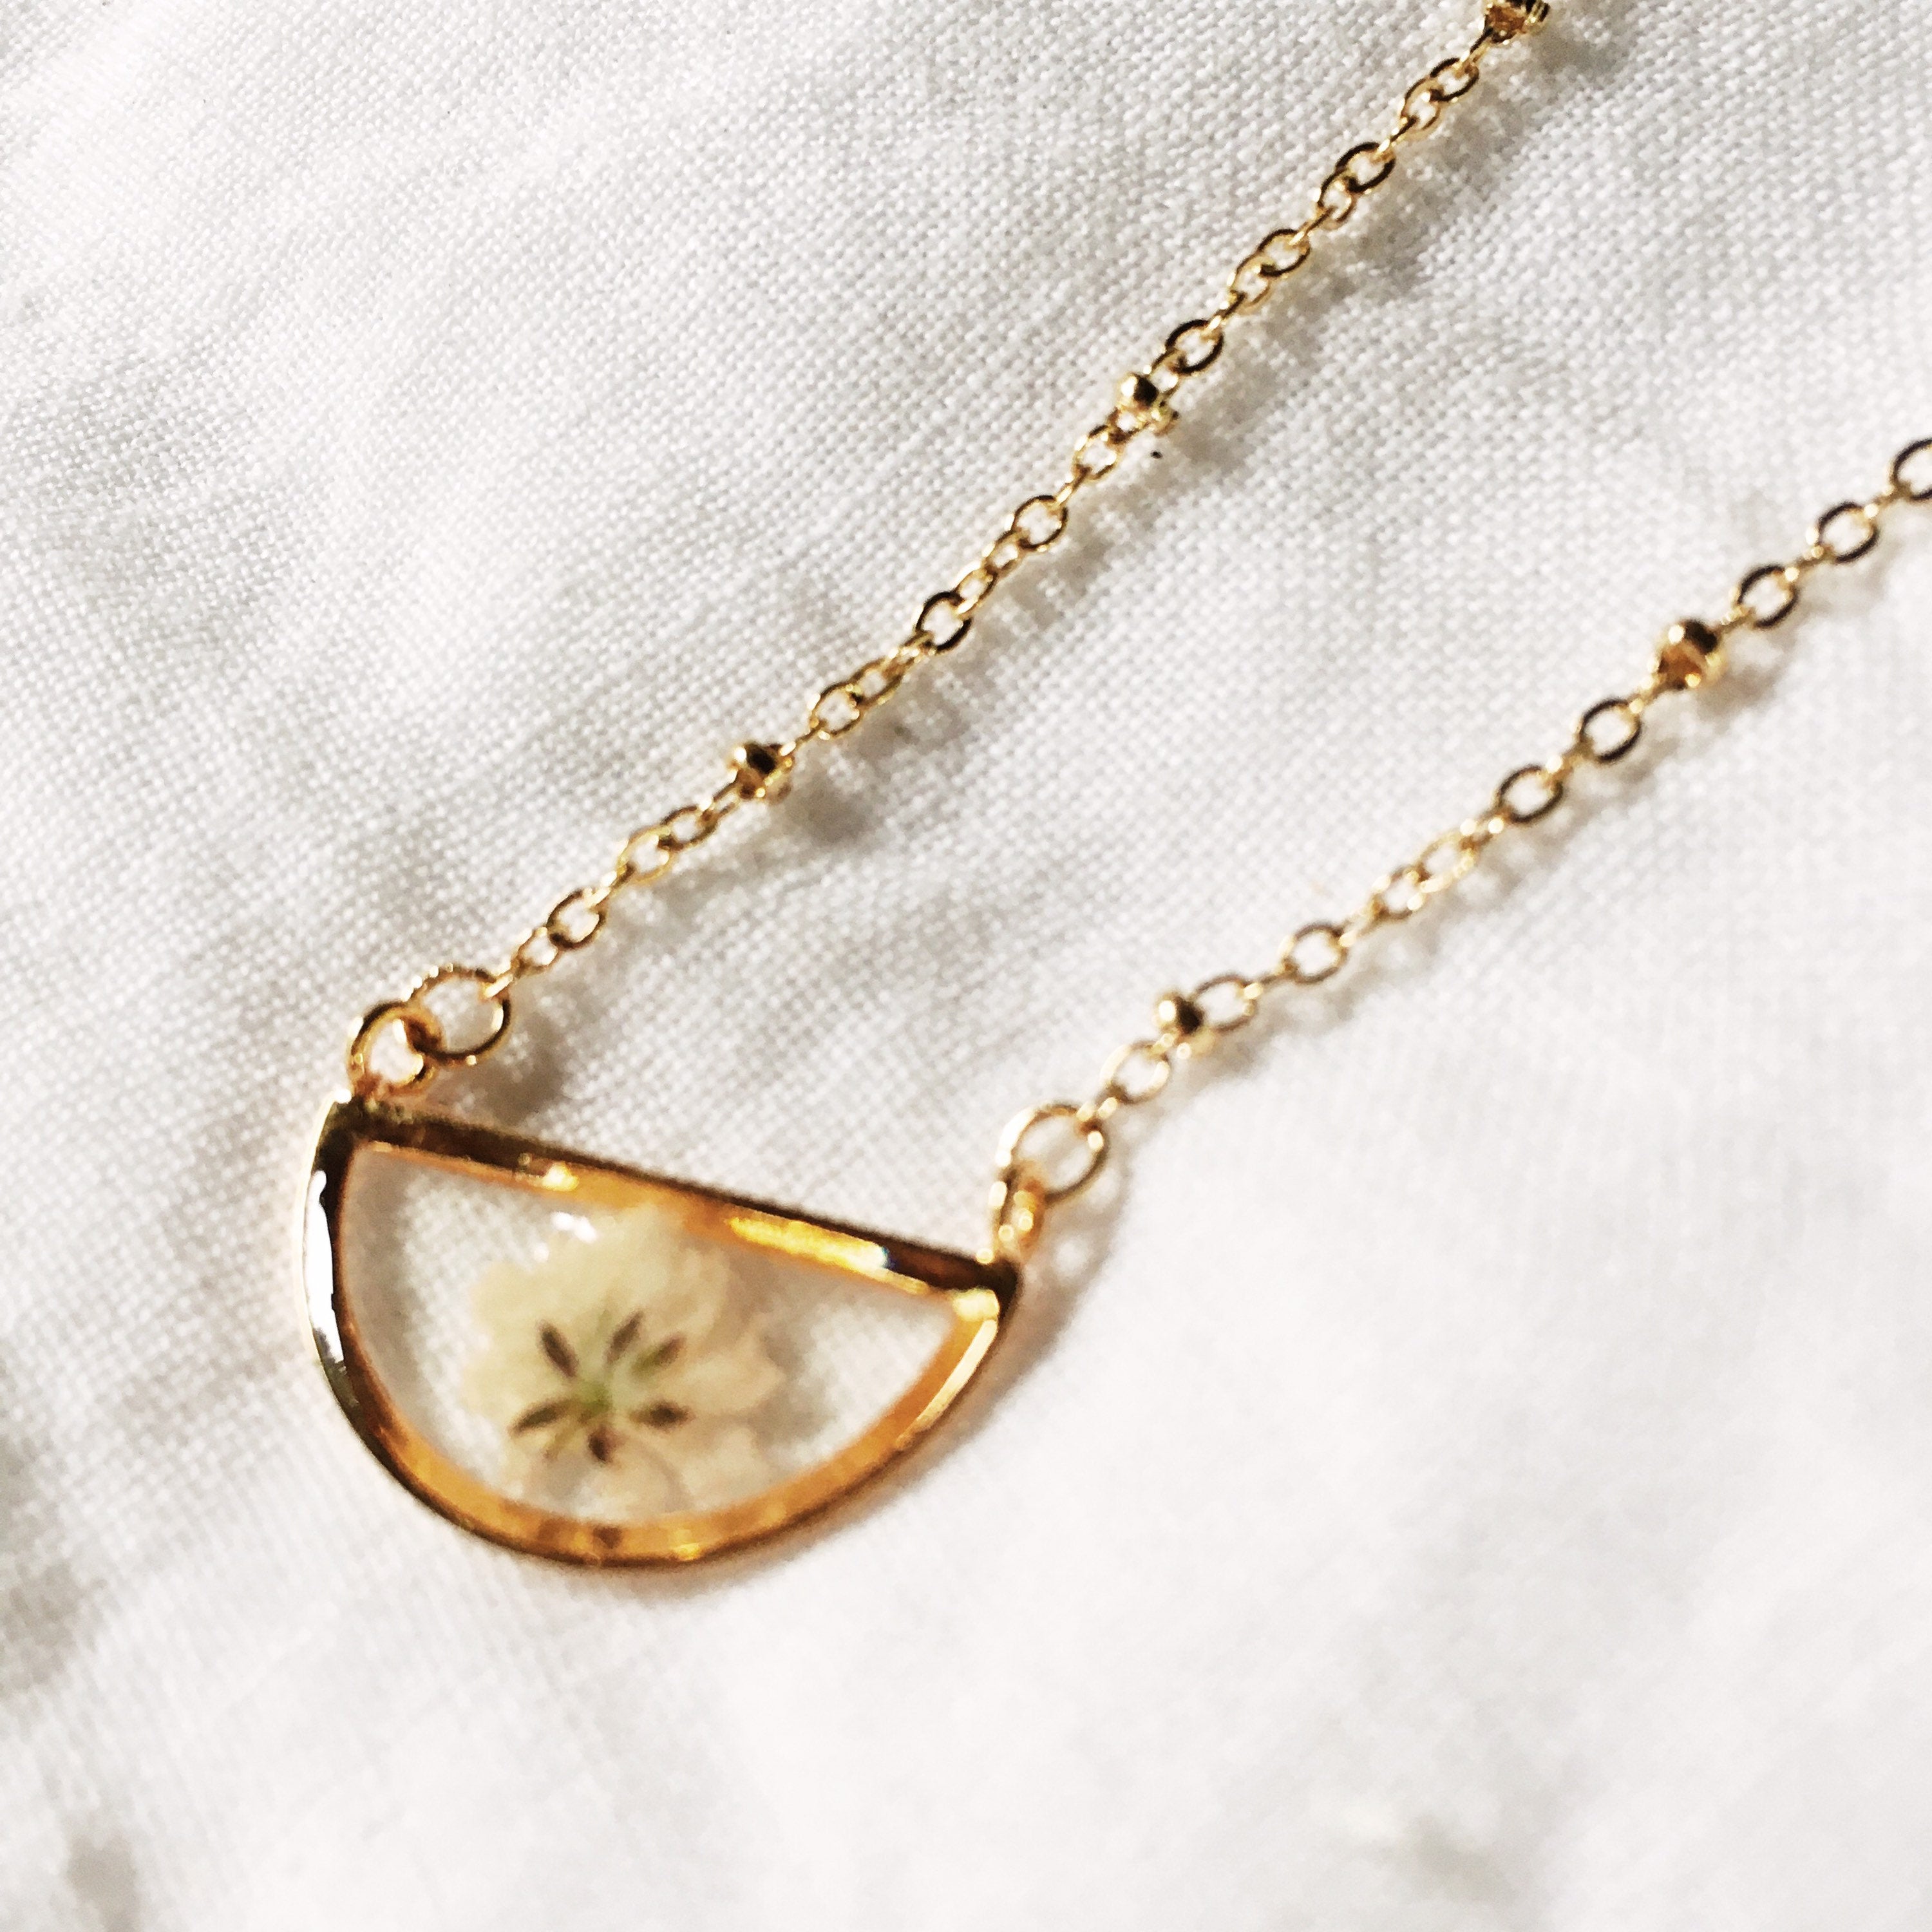 Gold Semicircle Baby's Breath Necklace